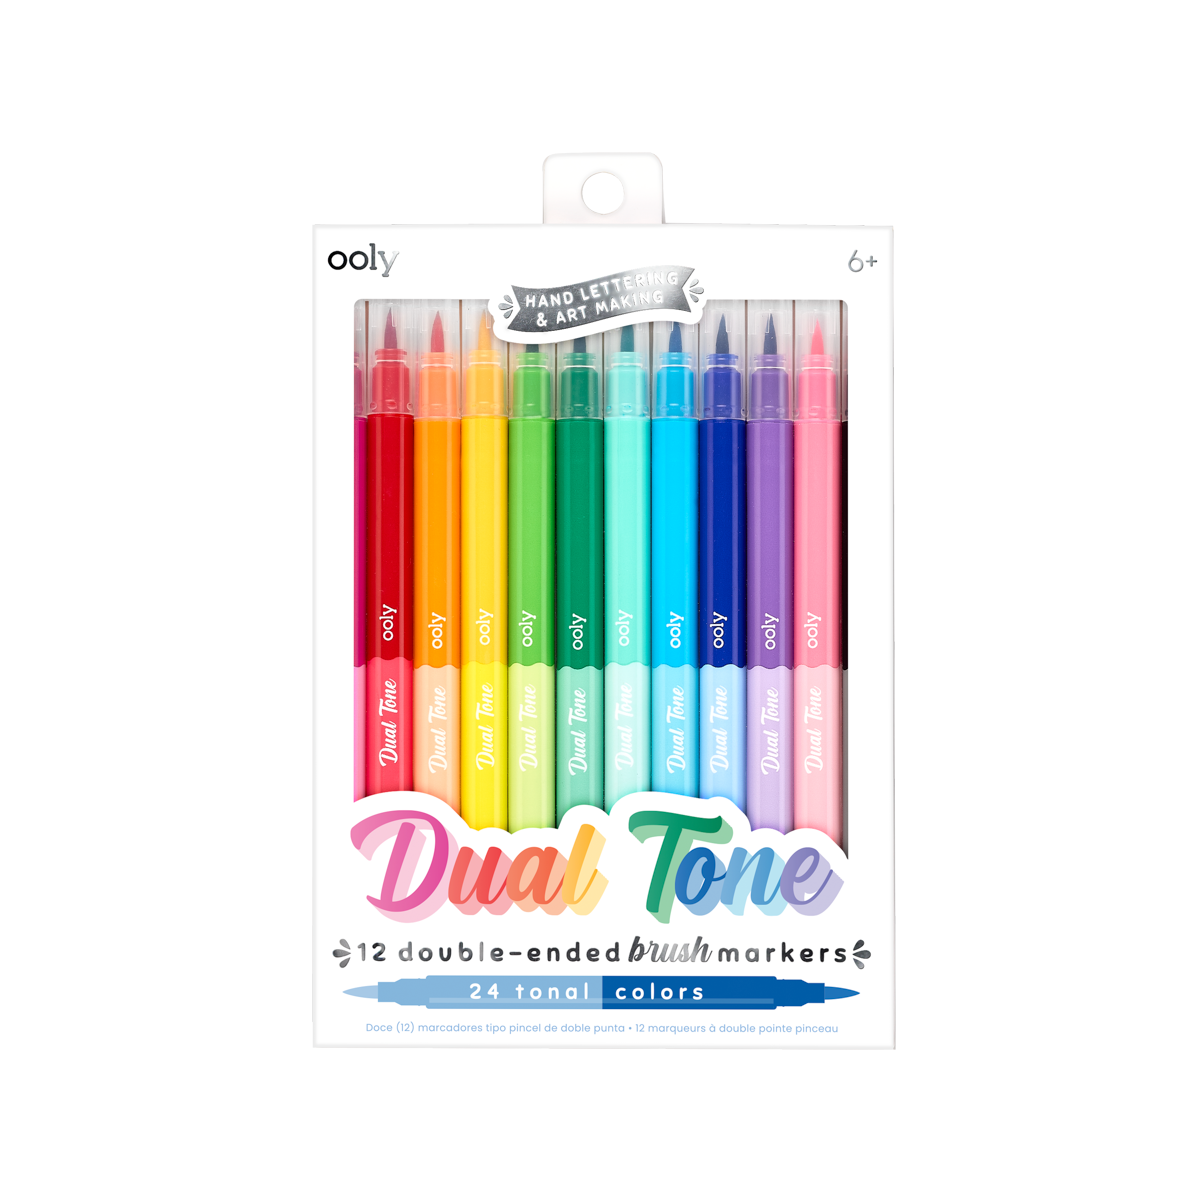 EooUooIP 60 Colours Graphic Marker Pens Set Permanent Art Marker Pens Drawing  Pens for Artists with Dual Tips on OnBuy